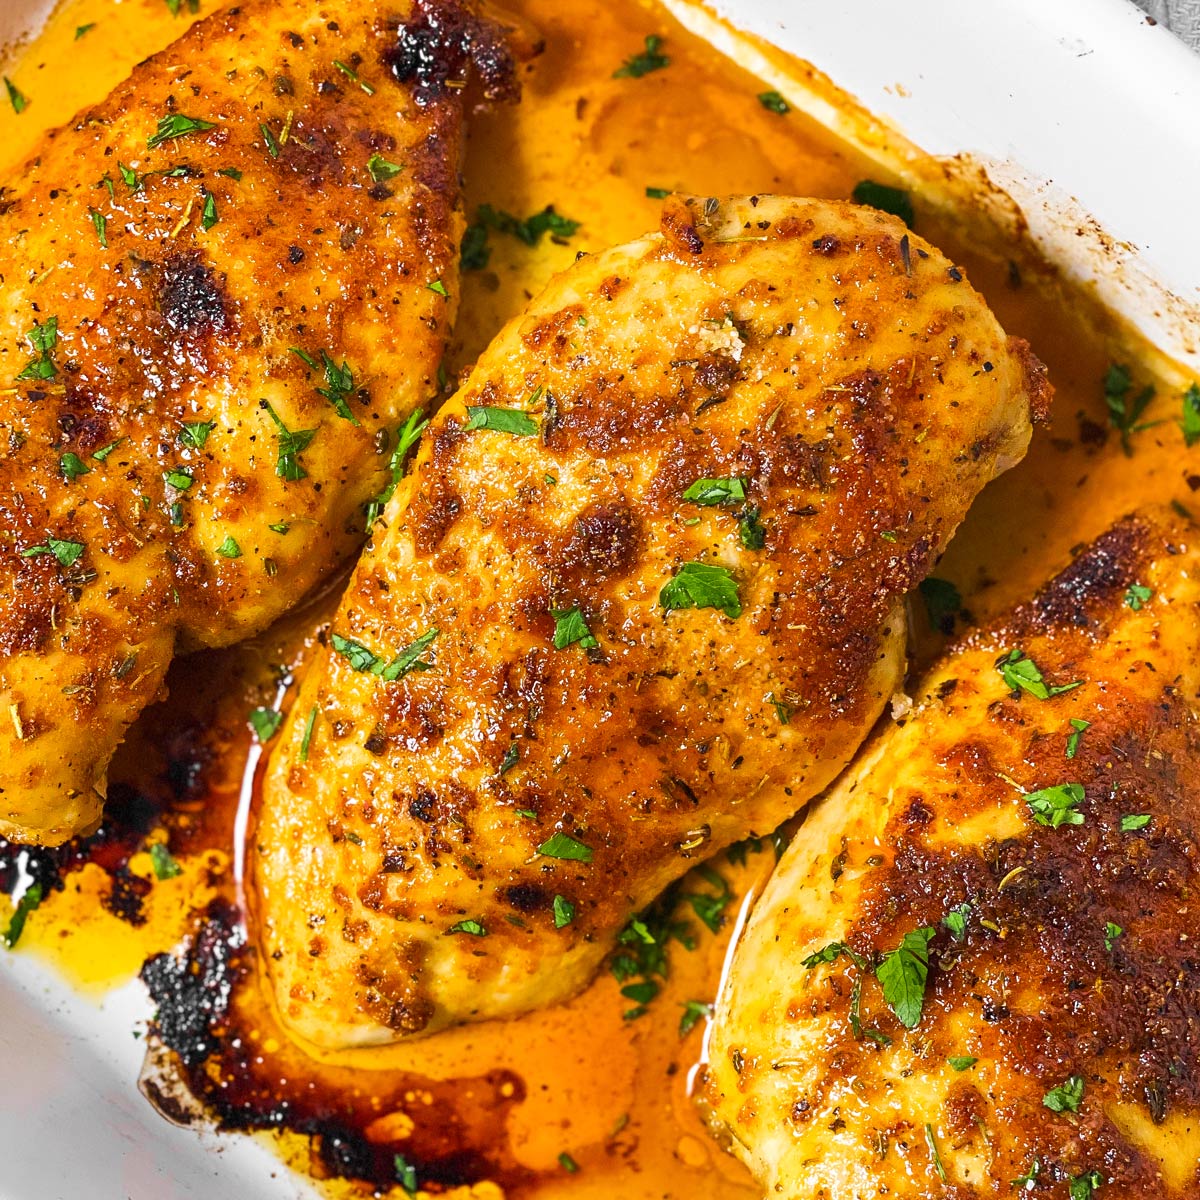 Baked Chicken Cutlets - The Clean Eating Couple